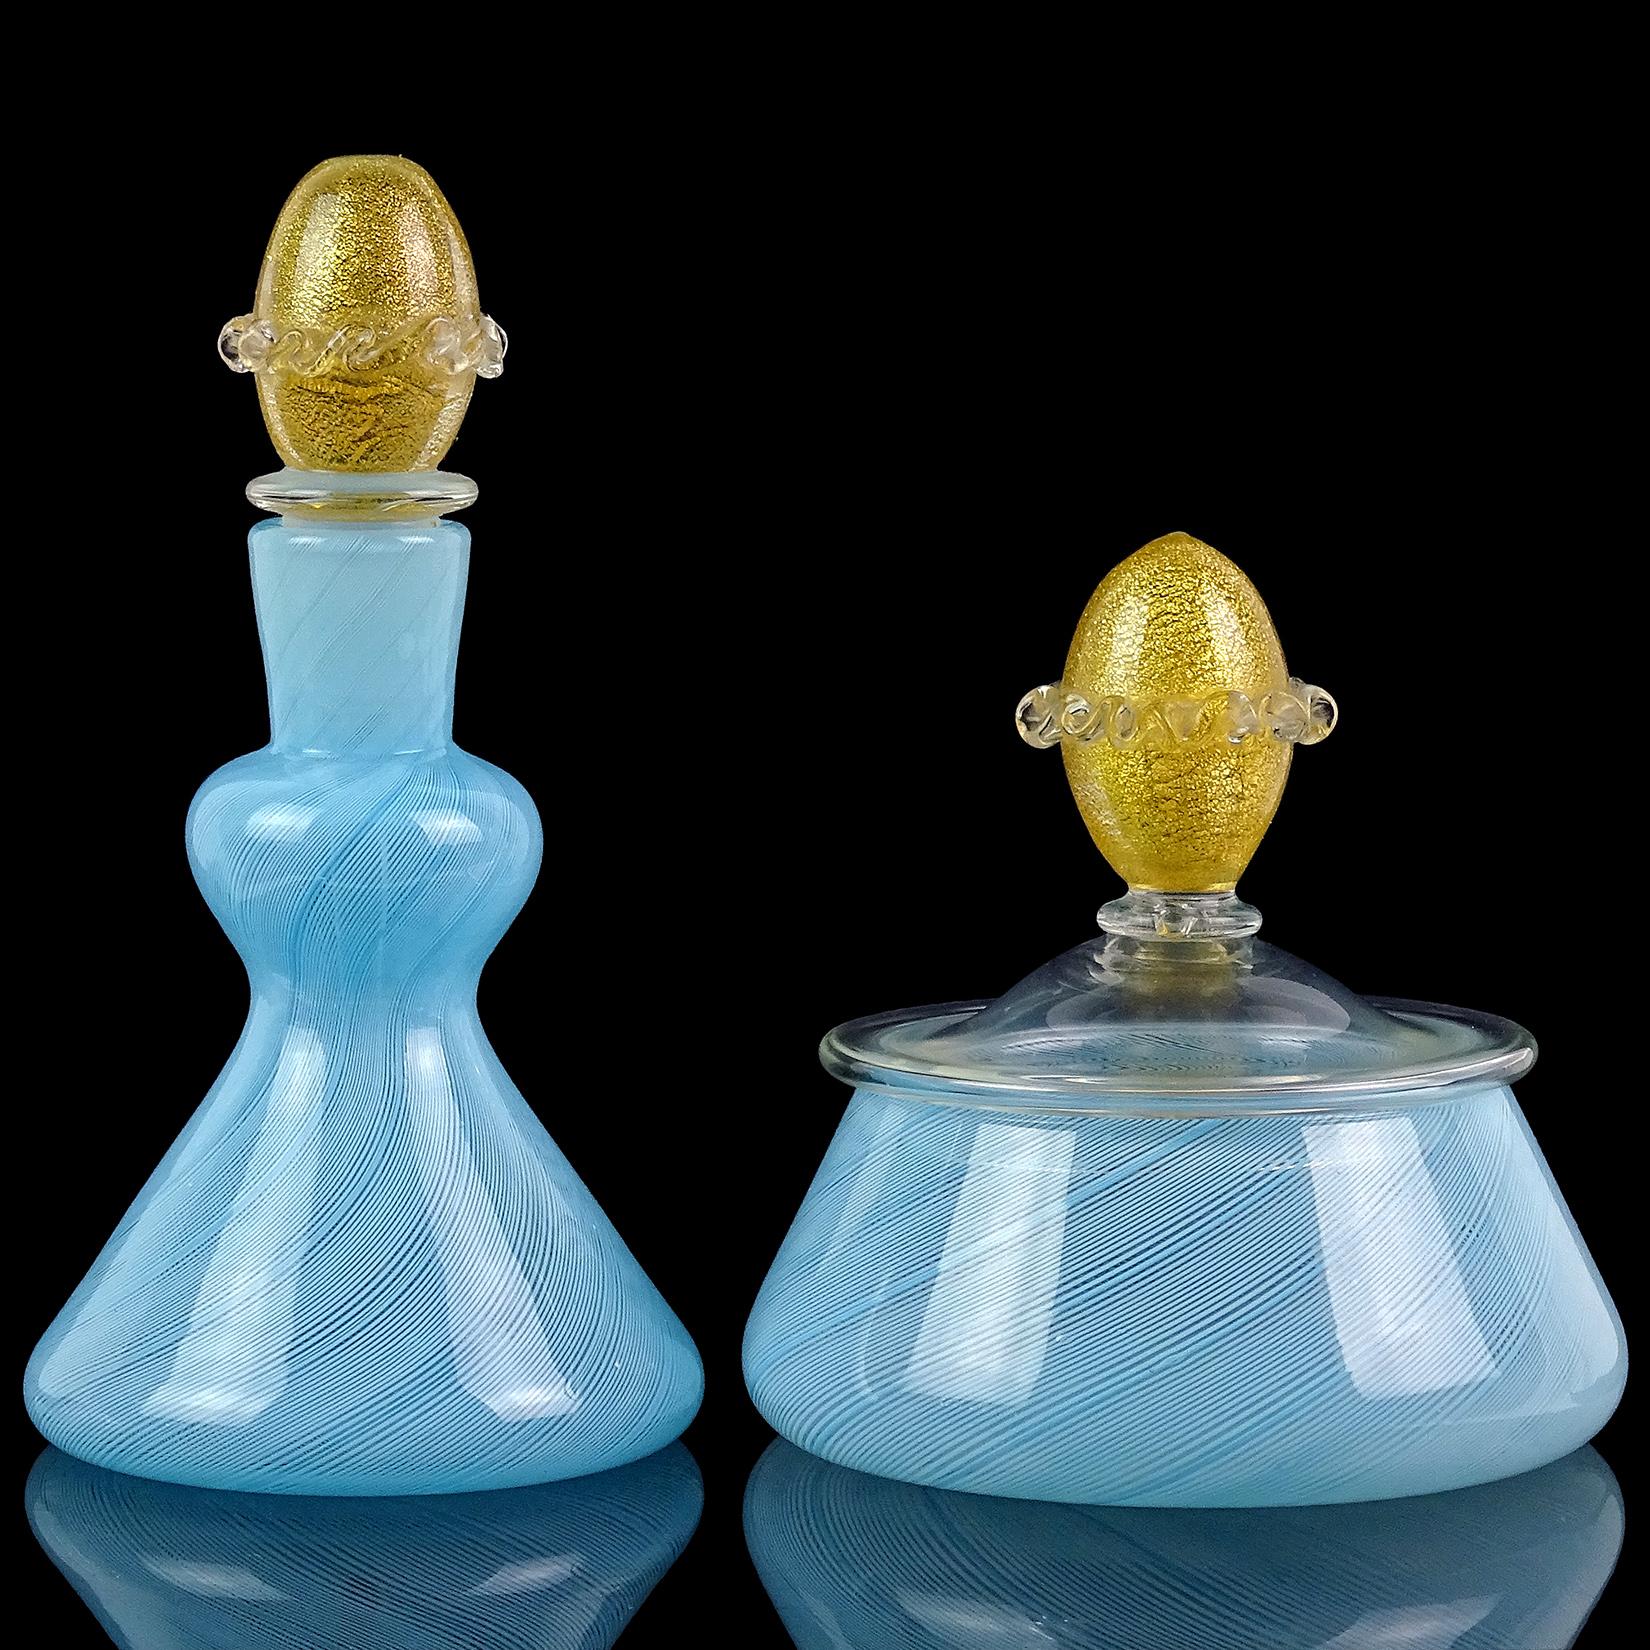 Beautiful vintage set of Murano hand blown blue ribbons and gold flecks Italian art glass vanity set. The perfume bottle and powder / jewelry box are made with very thin Filigrana ribbons in sky blue. They have gold leaf accents on each of the tops.